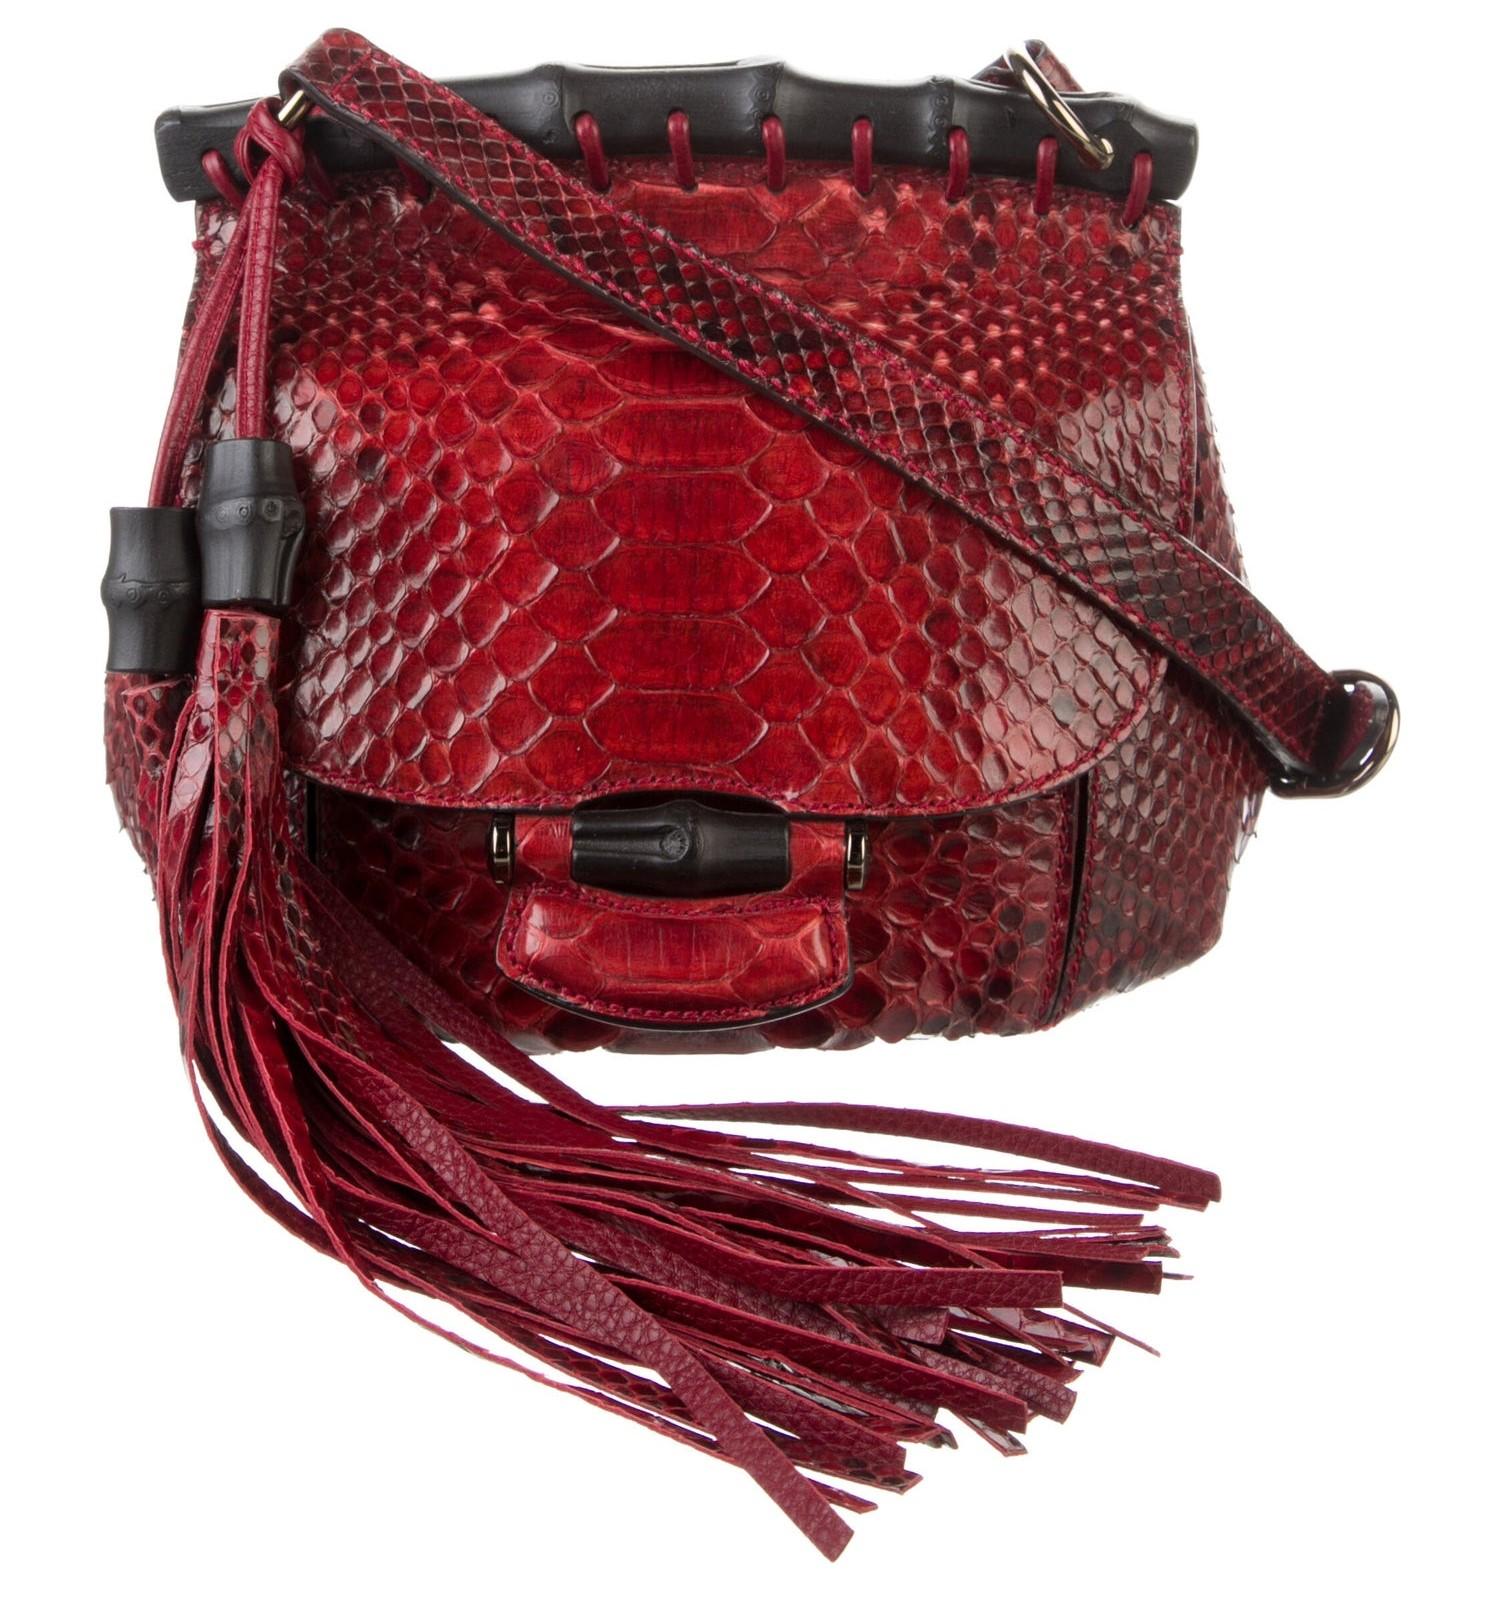 Women's New Gucci Nouveau Python Fringe Bamboo Runway Bag in Red $3100 For Sale